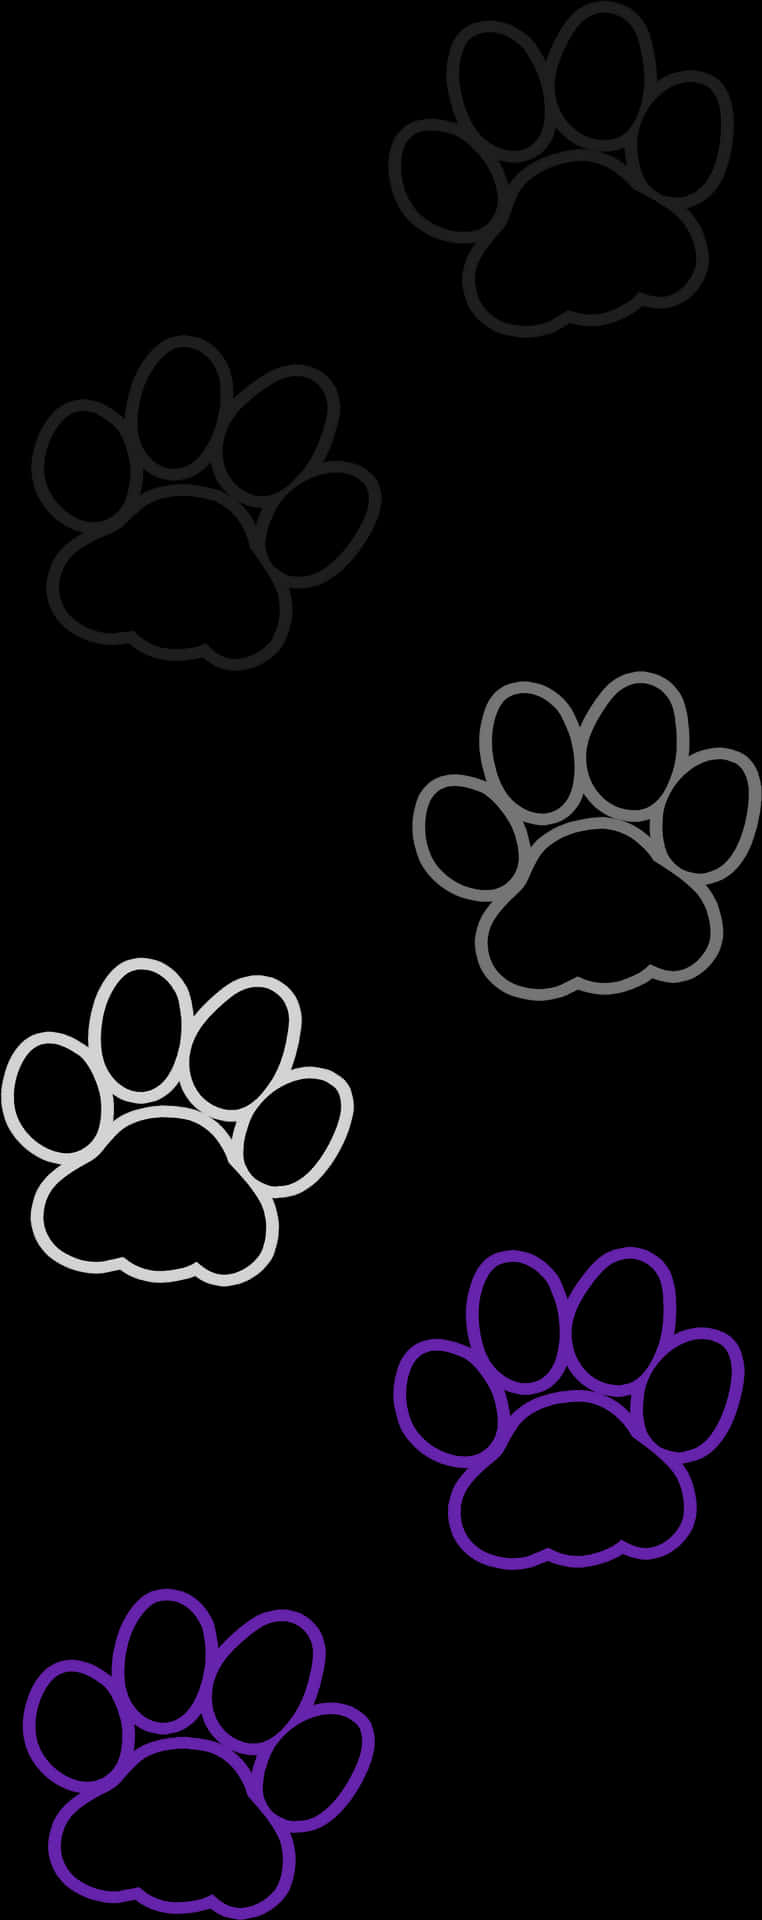 Varietyof Paw Prints Outline PNG image